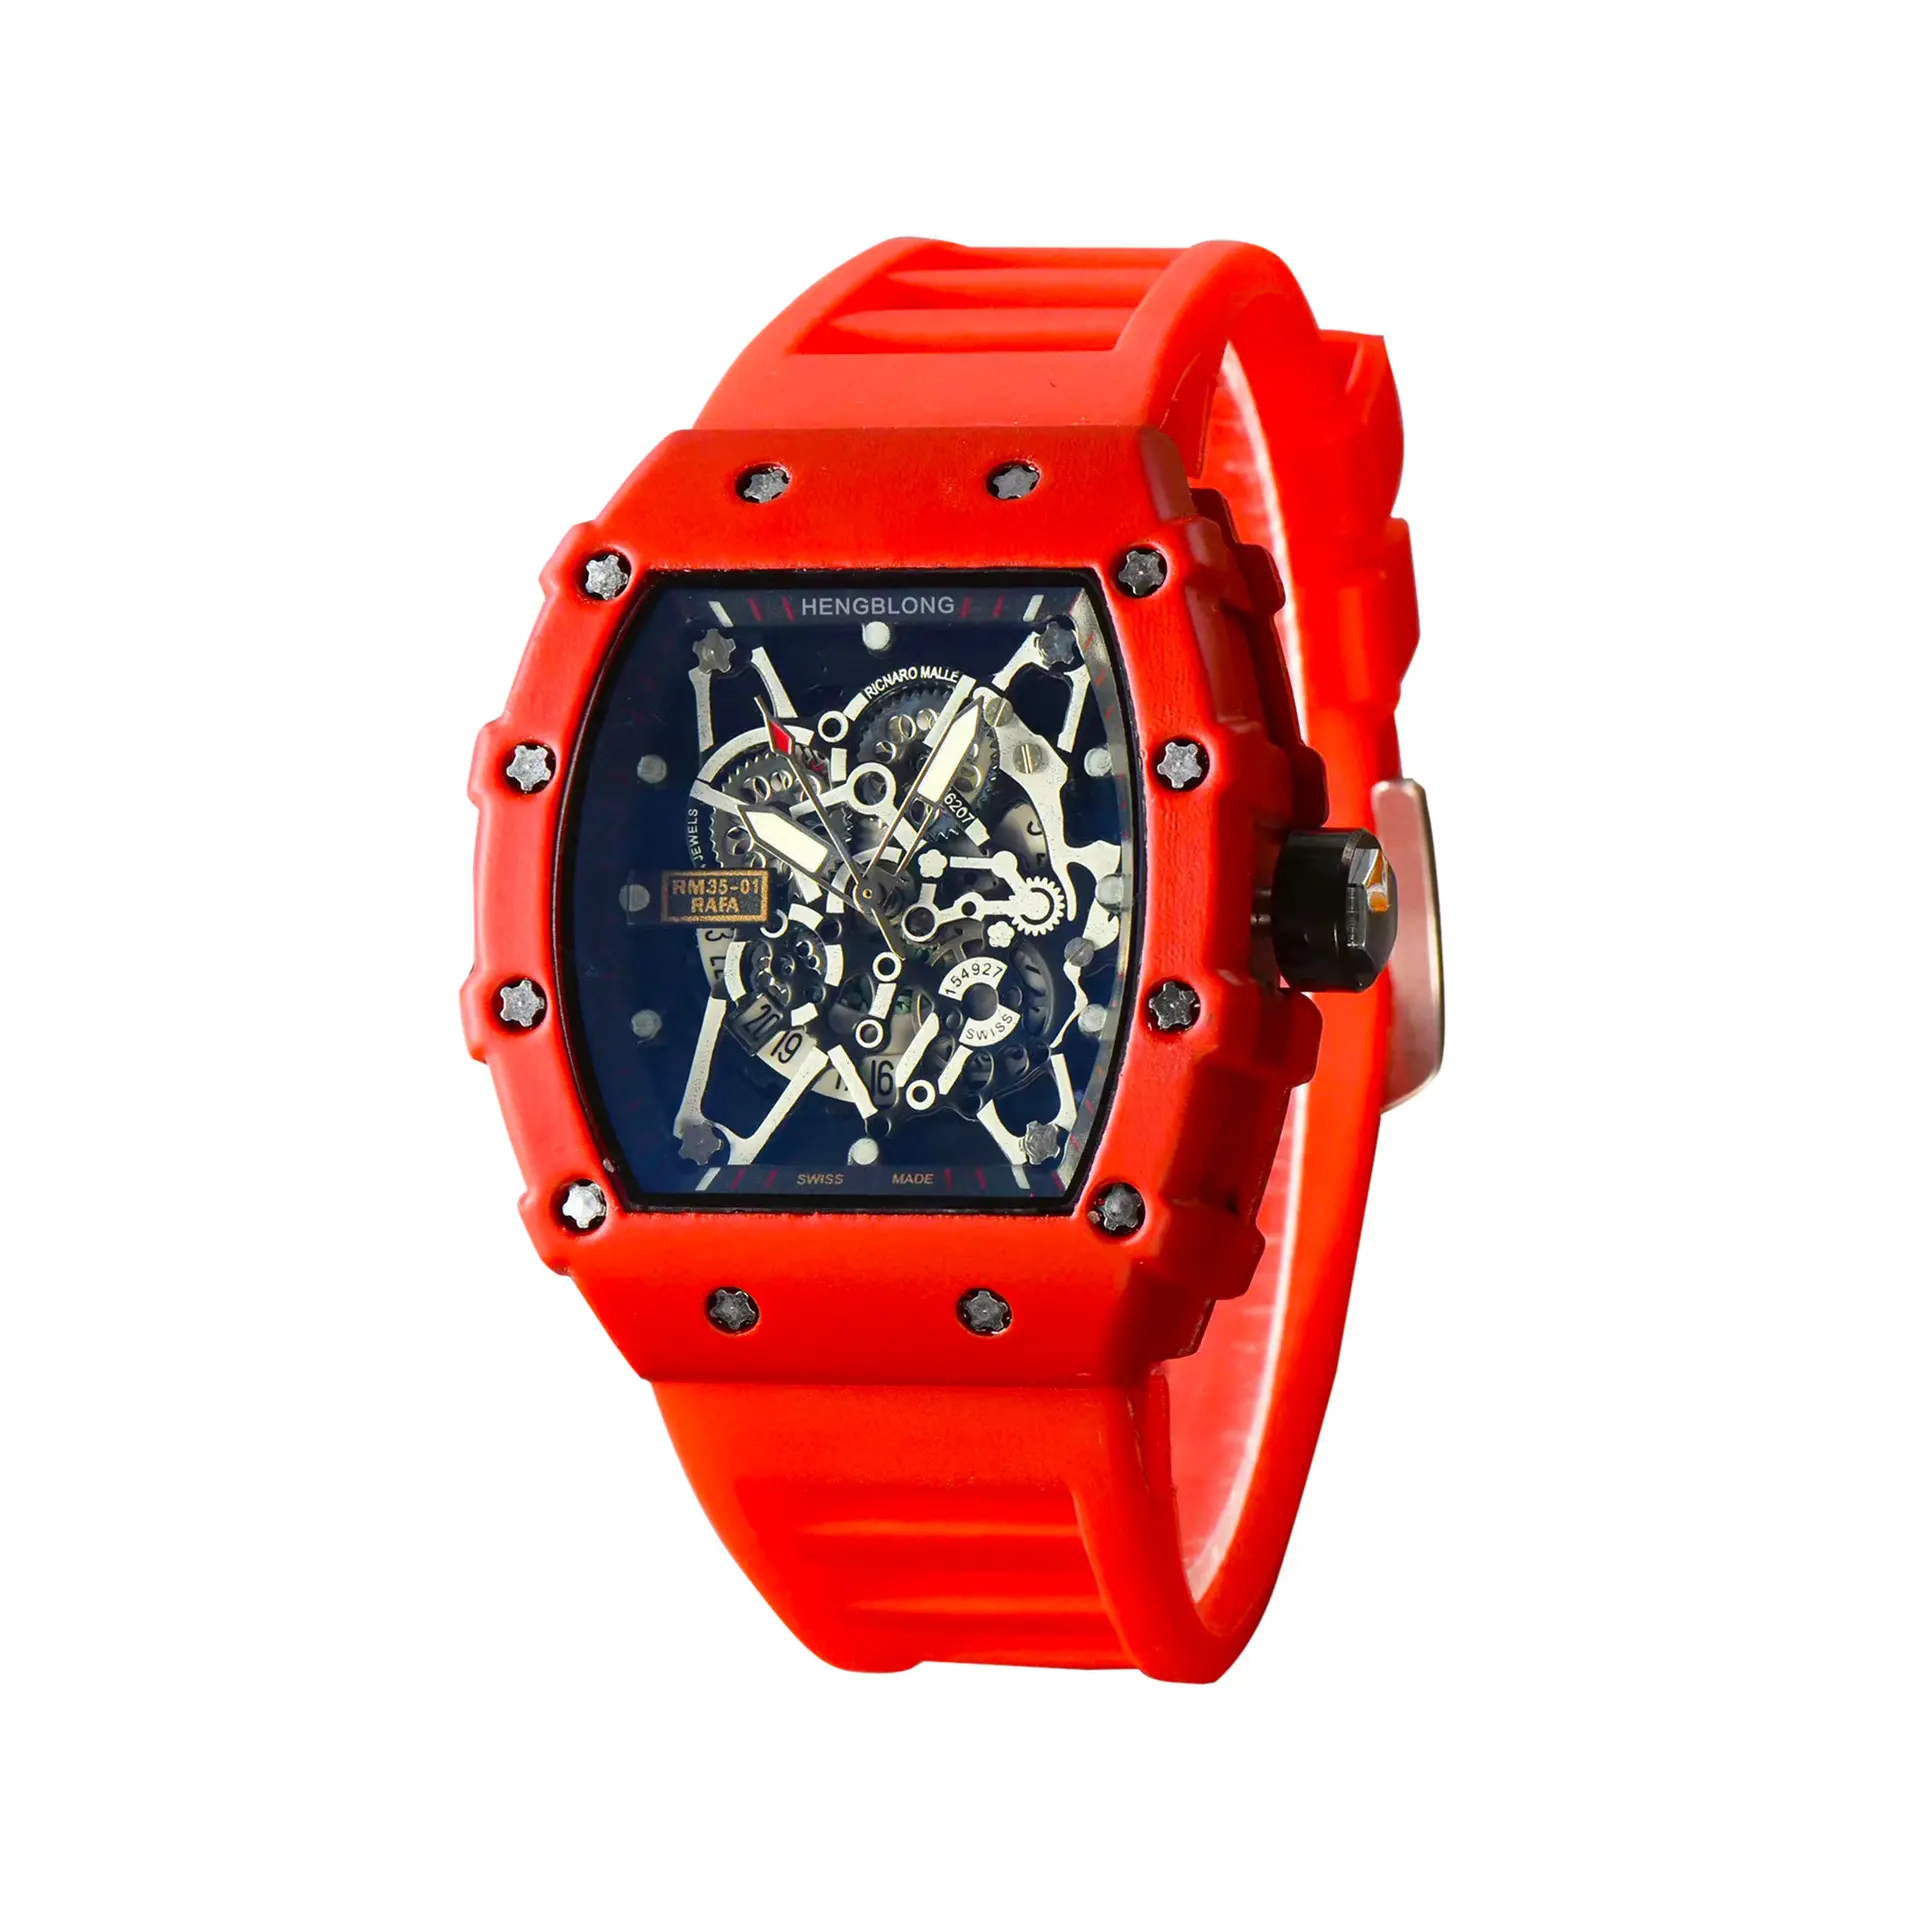 Rubber strap automatic looking white red and light blue color case stainless steel case back real well men watch skeleton